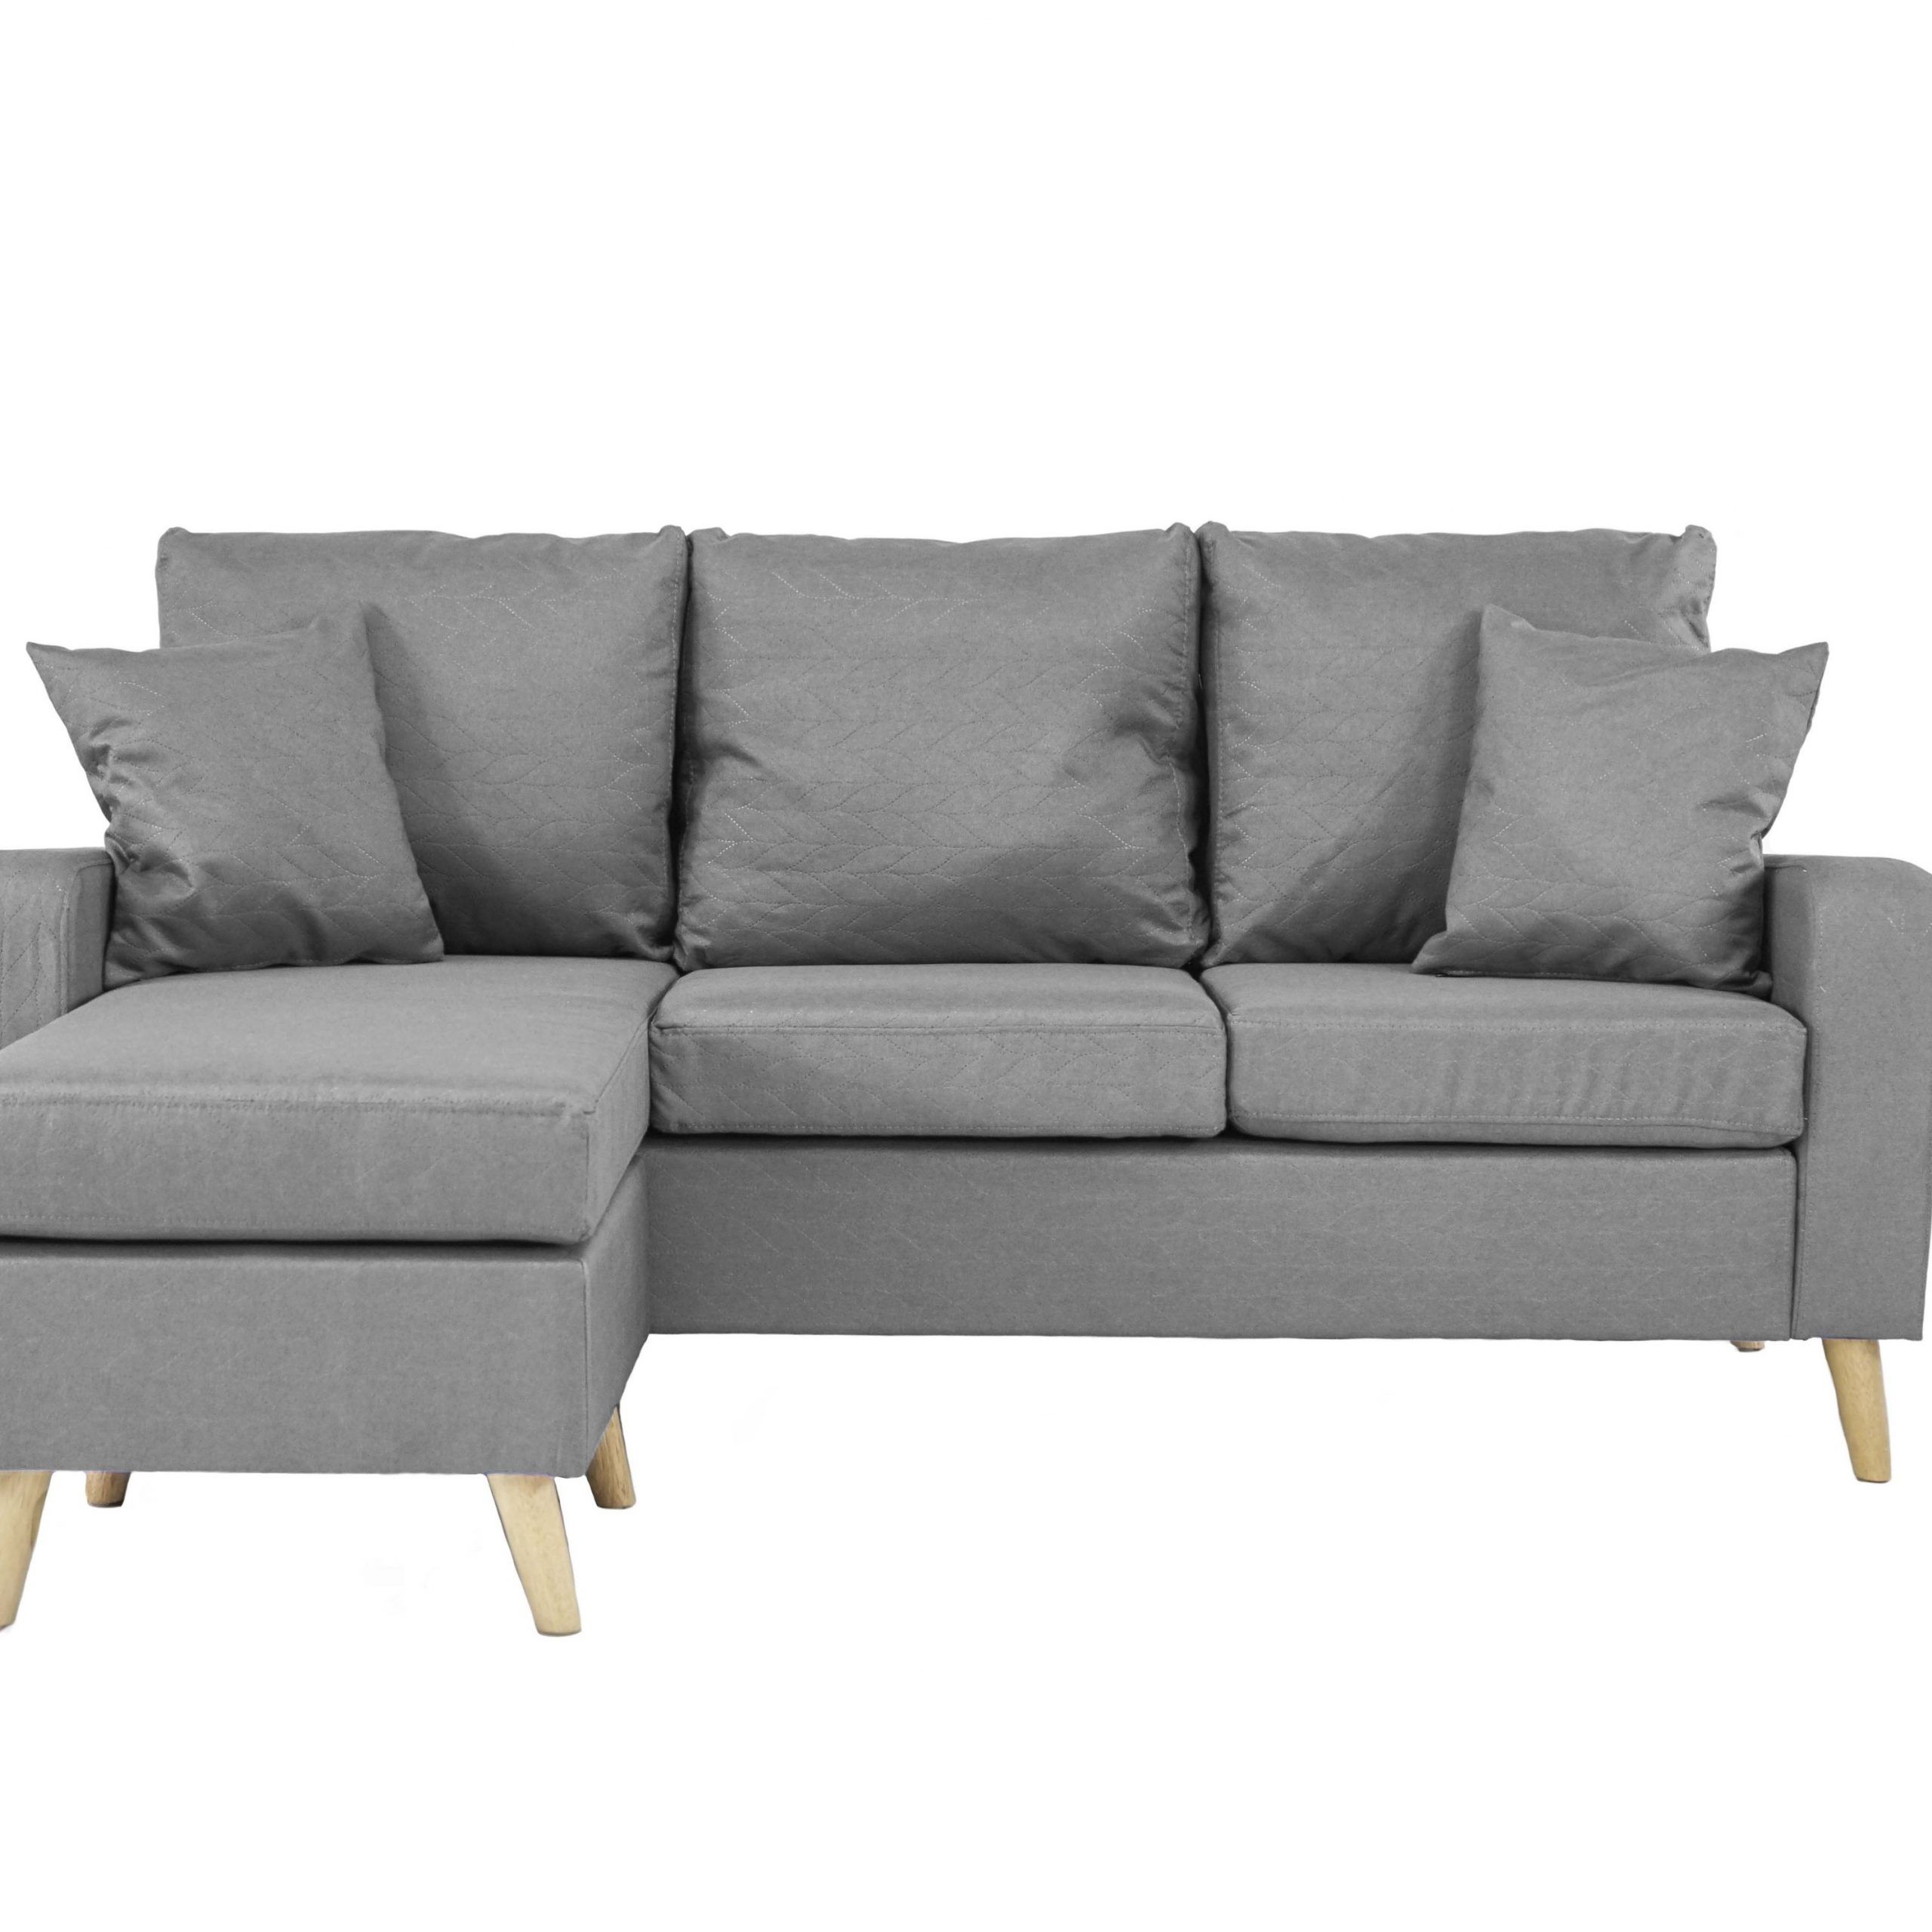 Featured Photo of 15 Best Ideas Dulce Mid-century Chaise Sofas Light Gray